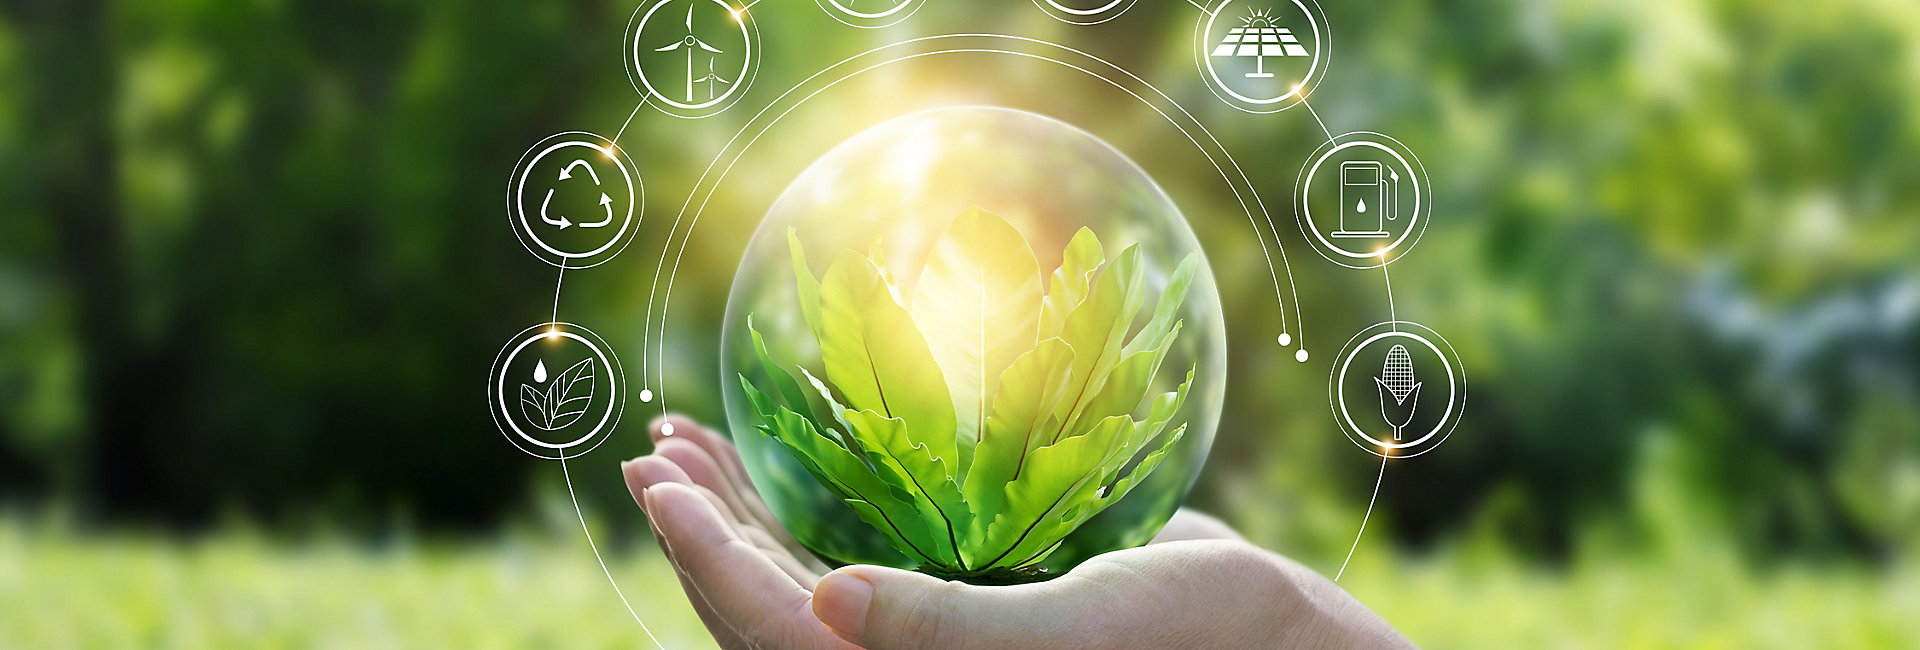 
Hands protecting globe of green tree on tropical nature summer background, Ecology and Environment concept; Shutterstock ID 1606190653; purchase_order: -; job: -; client: -